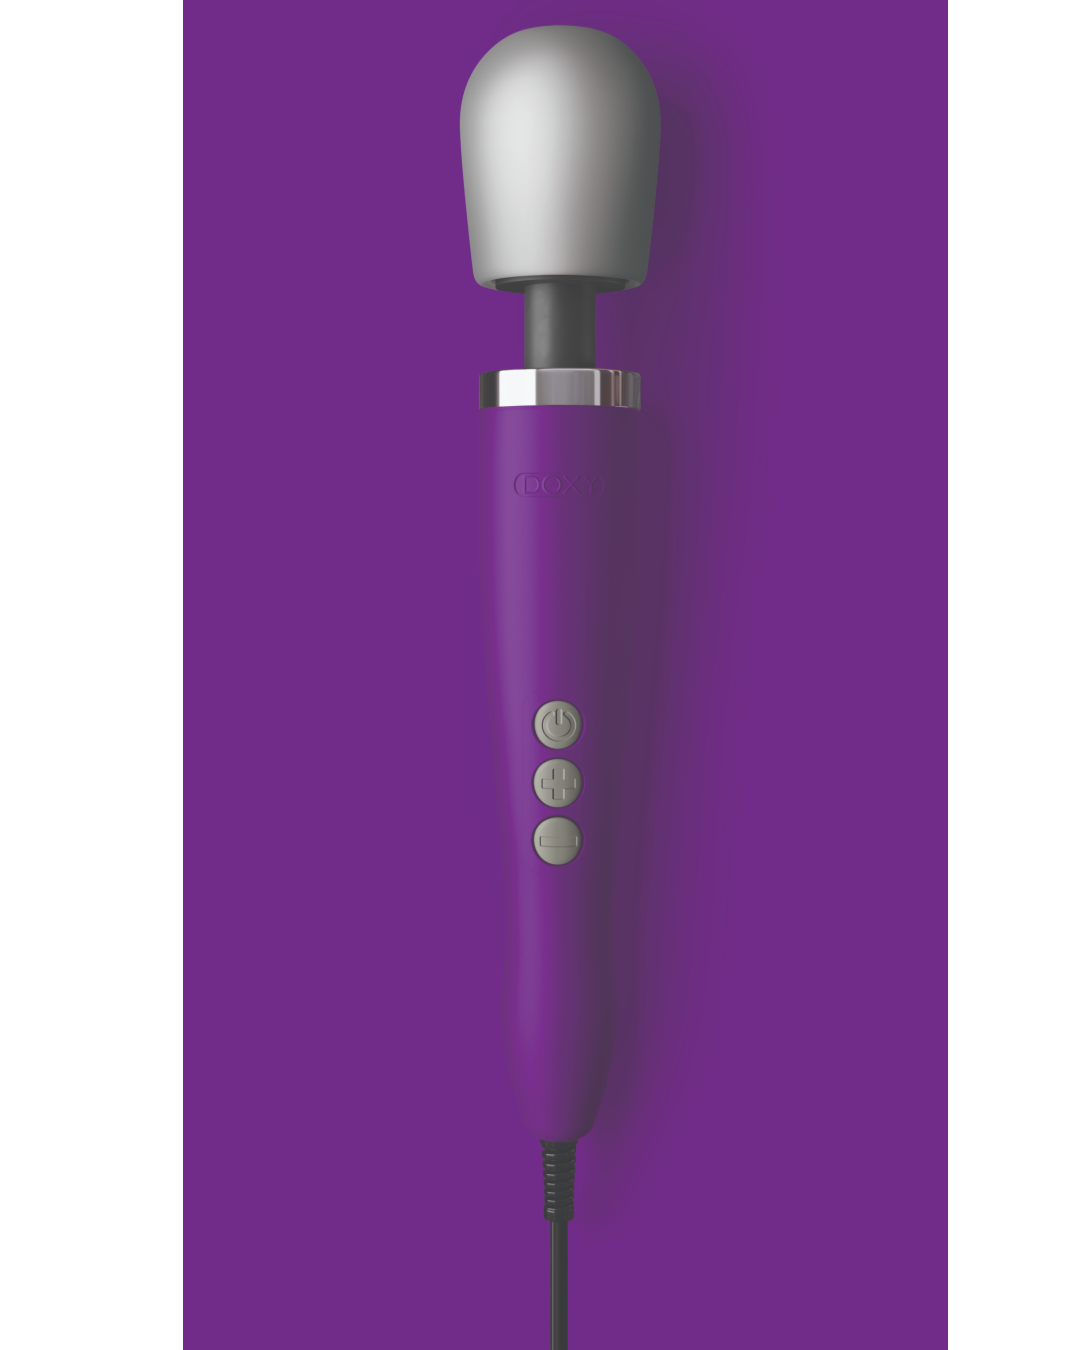 Doxy Extra Powerful Wand Vibrator - Purple on a lighter purple background front view of the whole wand and buttons